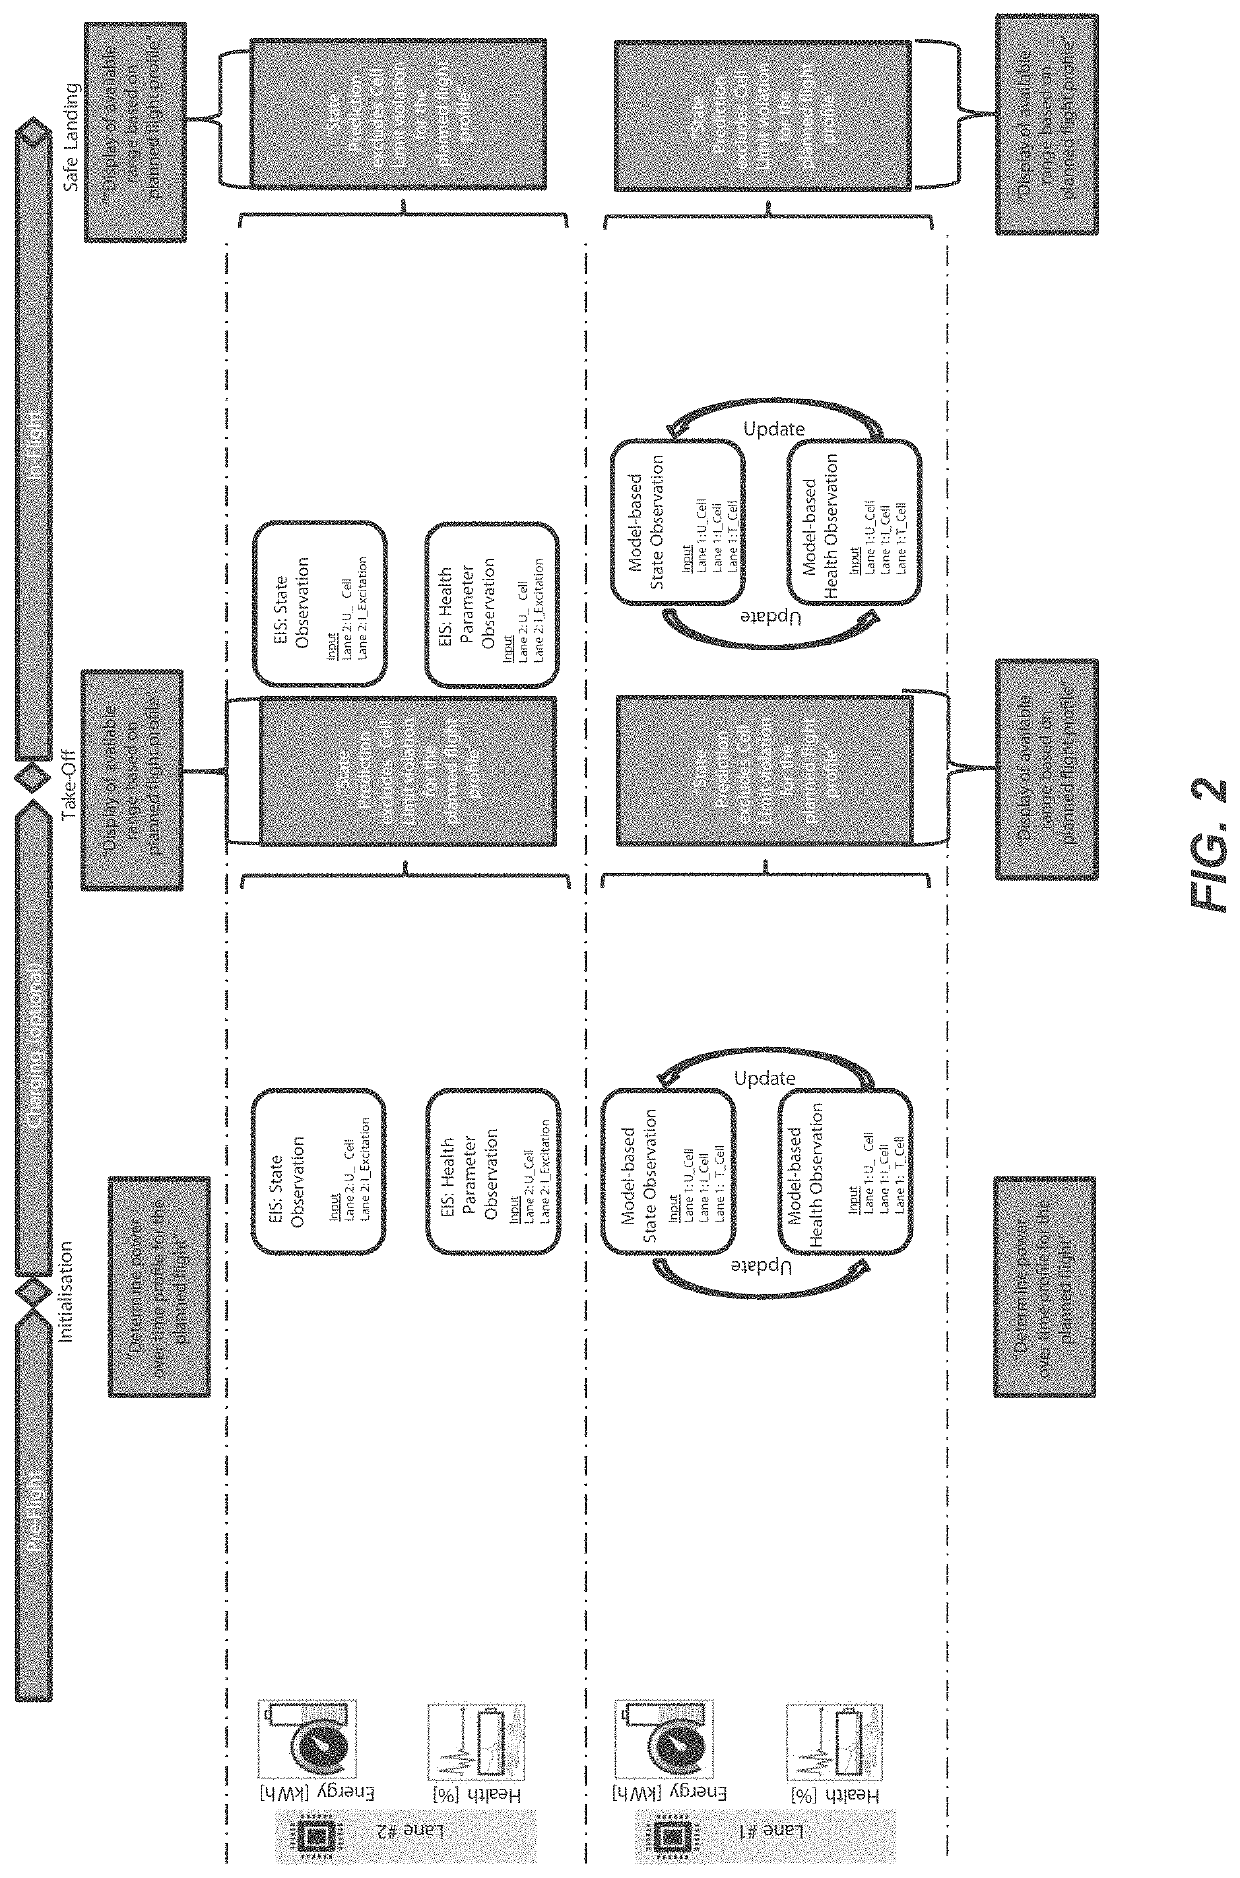 Battery management system for an electric air vehicle